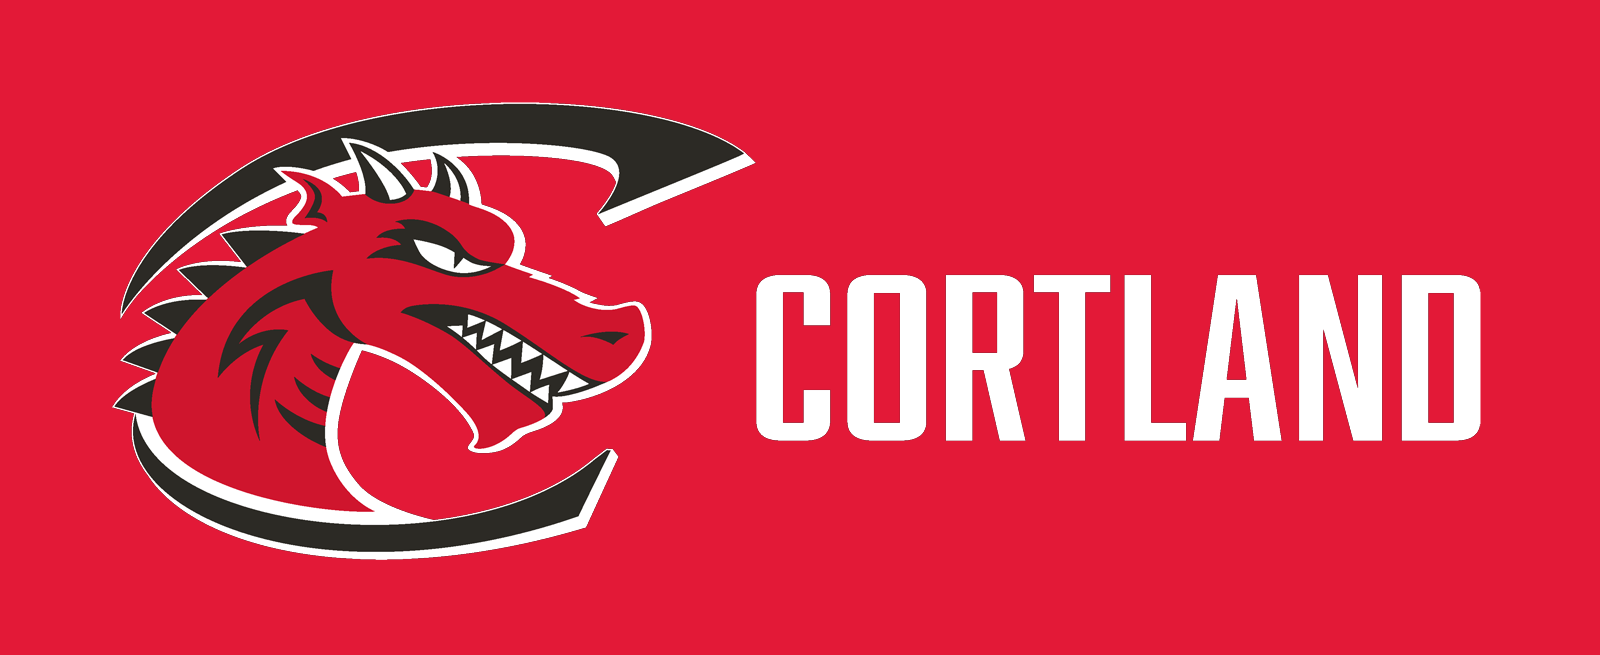 Two-color on a red background horizontal version of the secondary mark cortland lockup